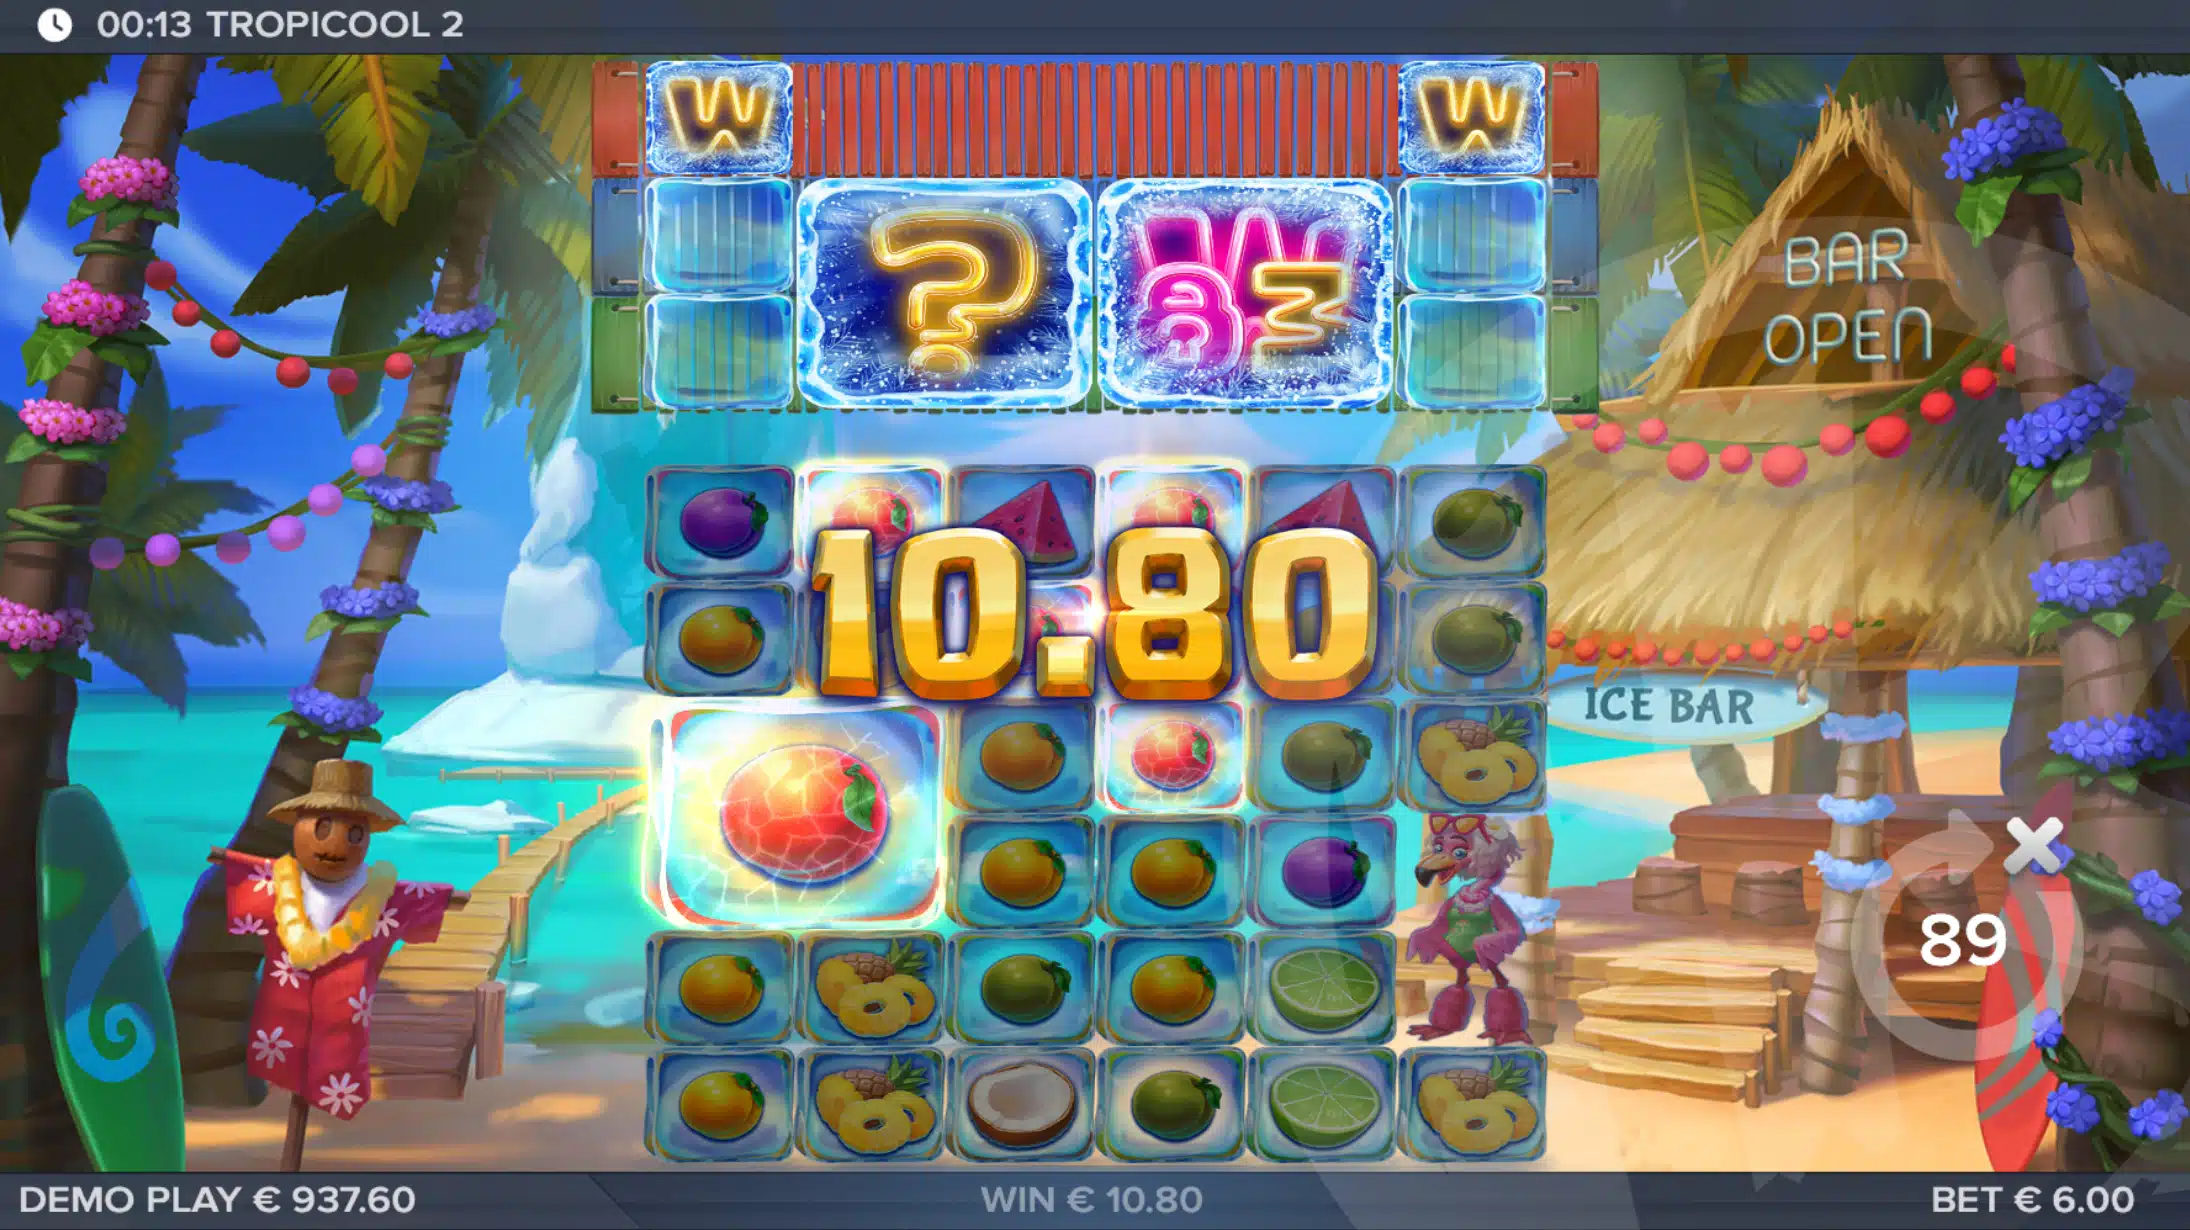 Tropicool 2 Offers Players 46,656 Ways to Win